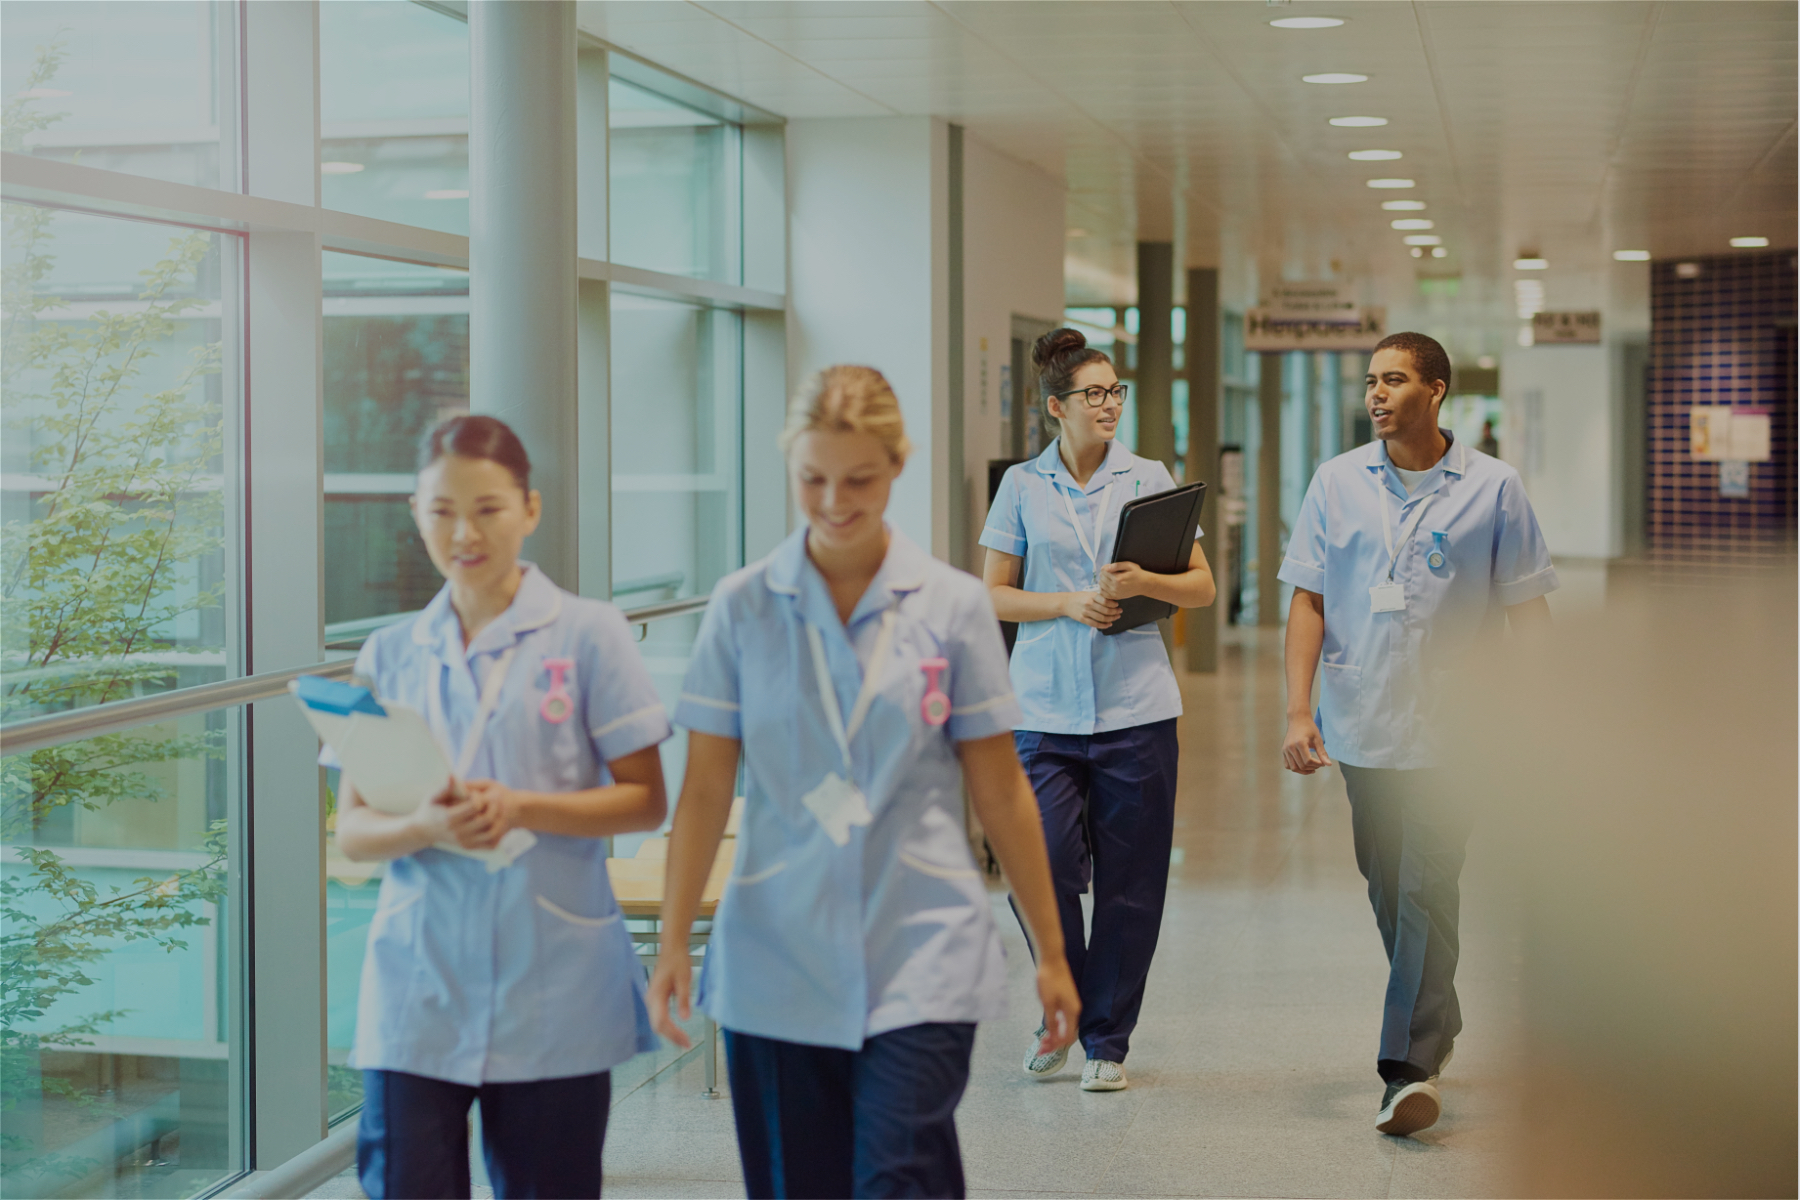 Image of a group of nurses walking down a hallway